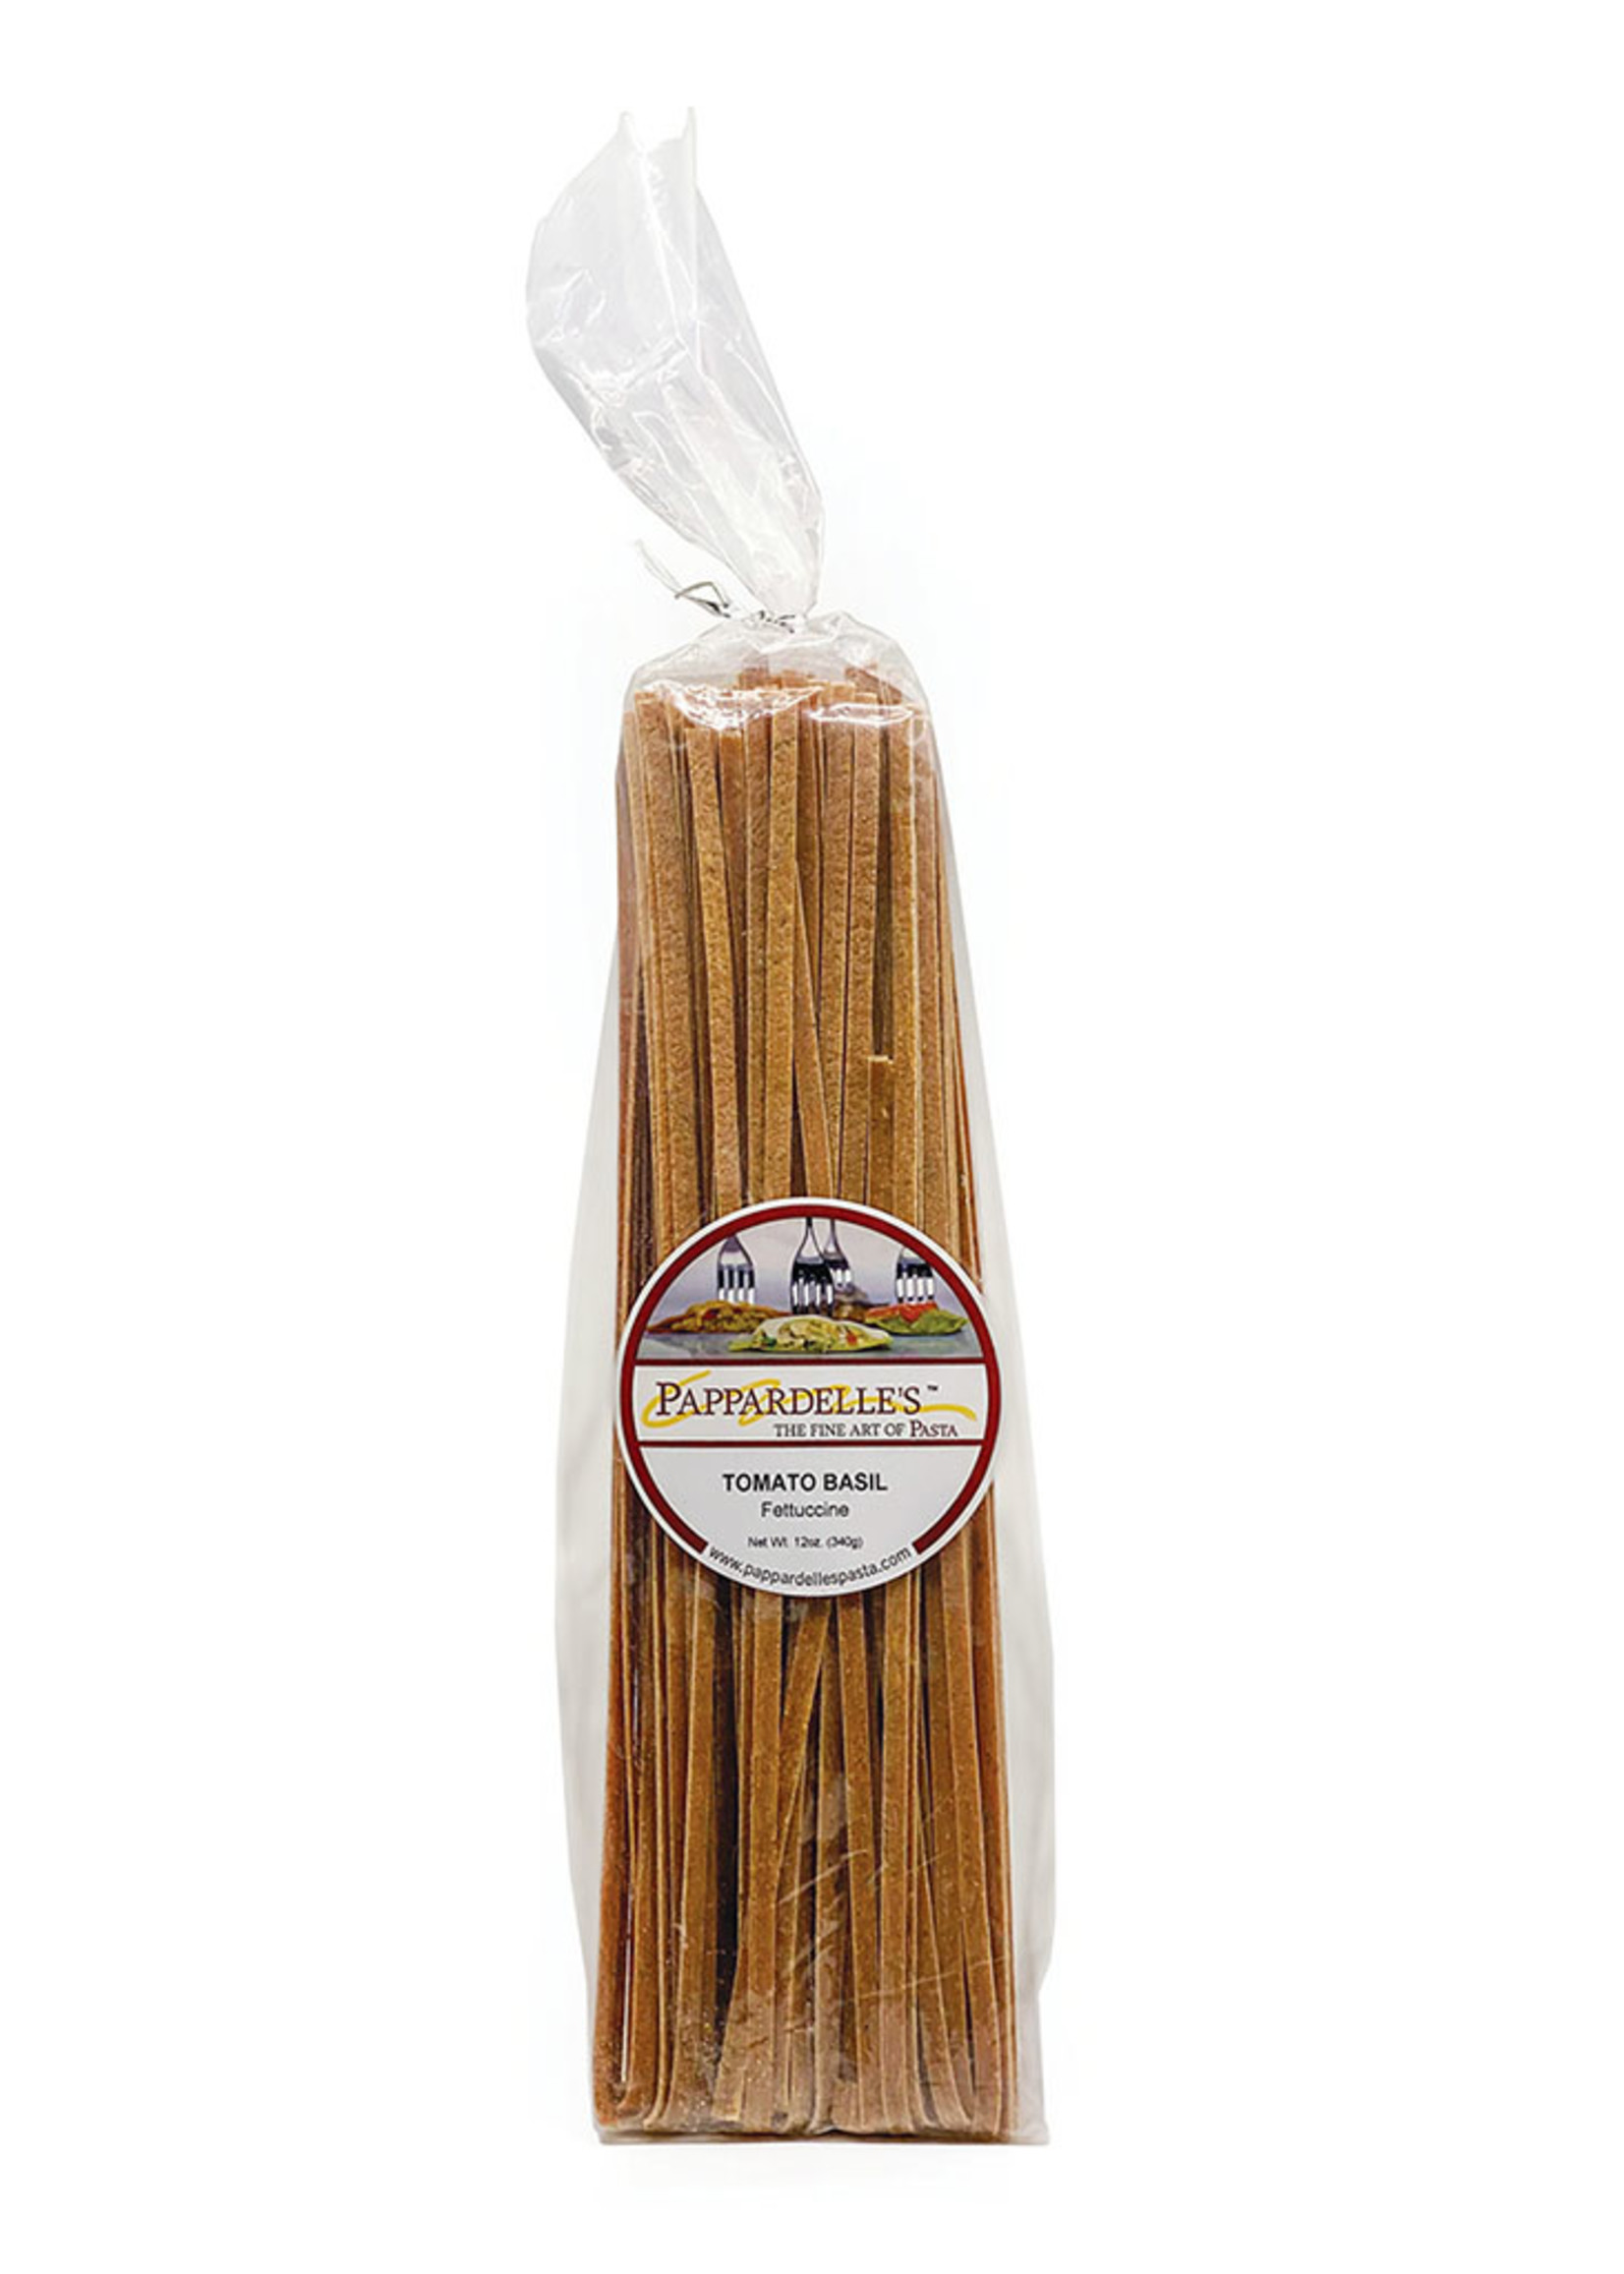 Pappardelle's Pappardelle's Tomato Basil Fettuccine Flat Cut Dired Pasta 12.oz Bag